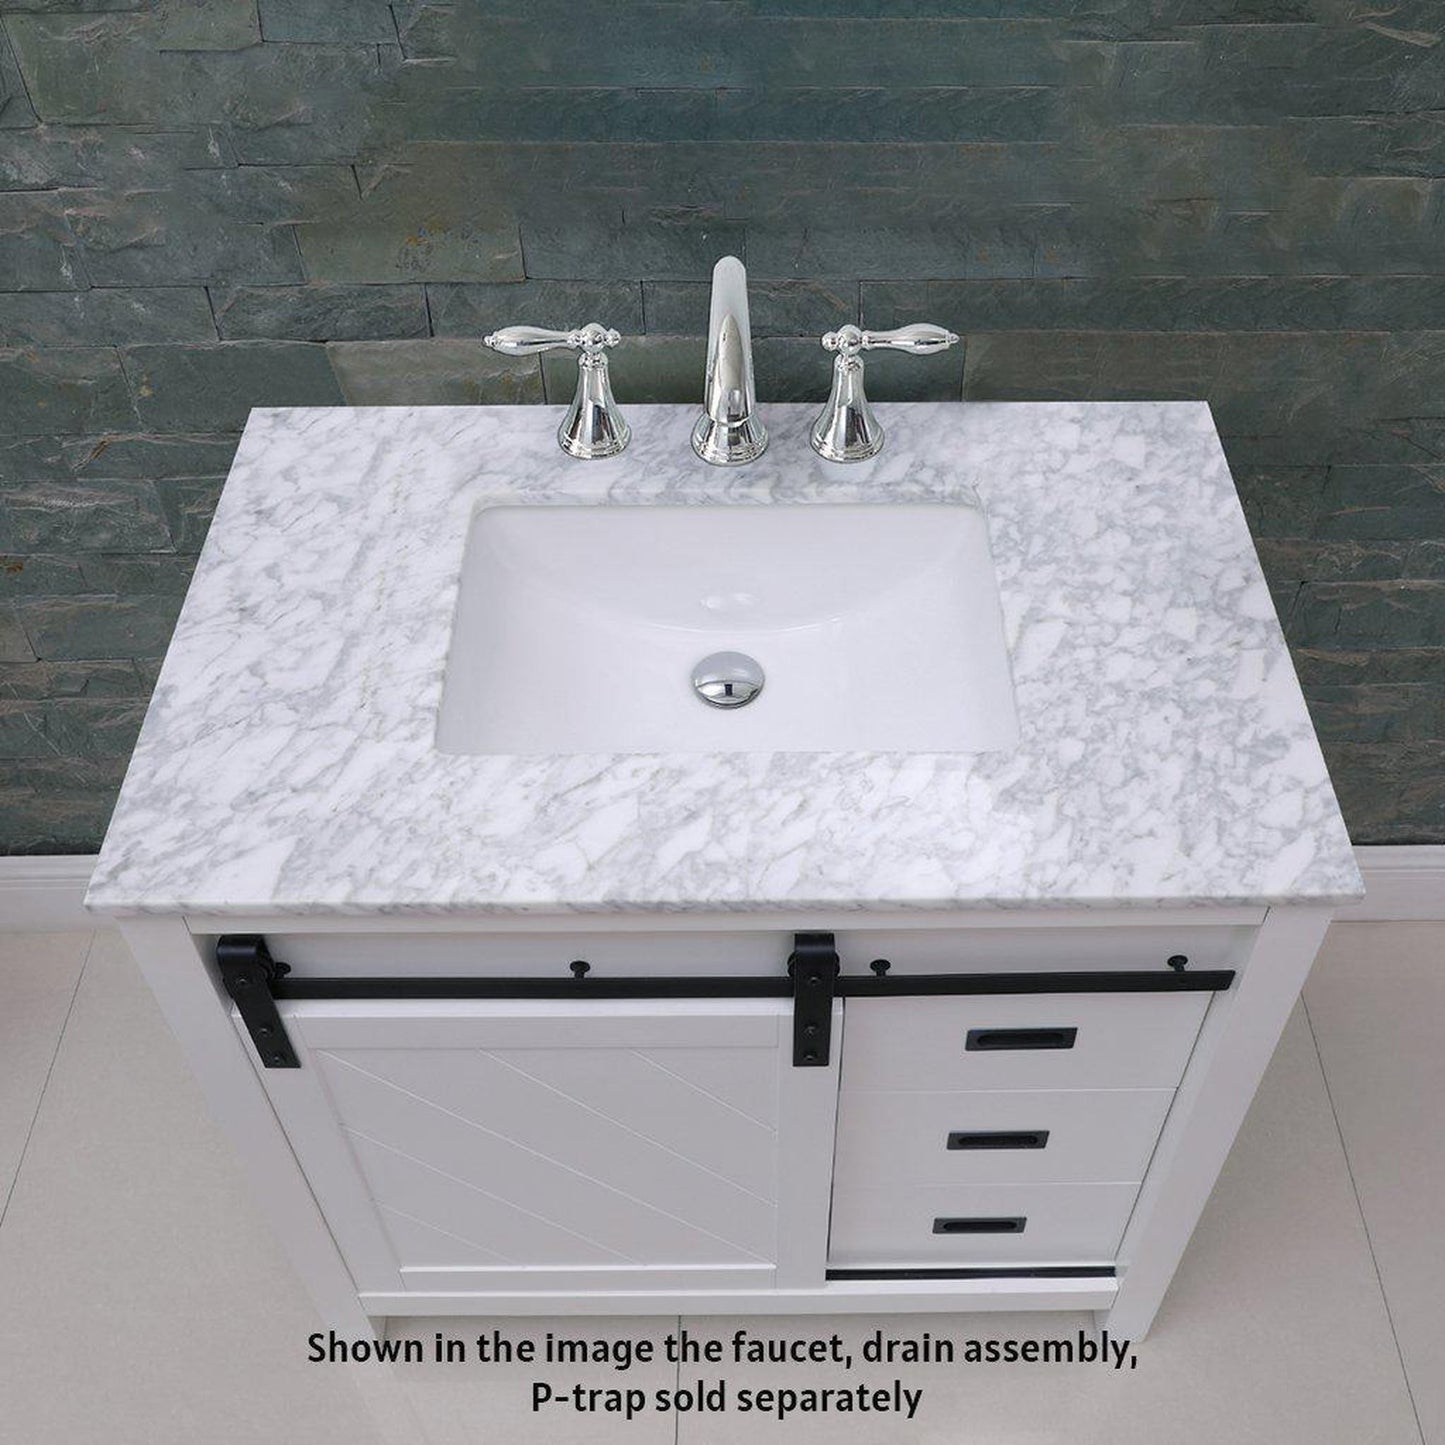 Altair Kinsley 36" Single White Freestanding Bathroom Vanity Set With Natural Carrara White Marble Top, Rectangular Undermount Ceramic Sink, and Overflow